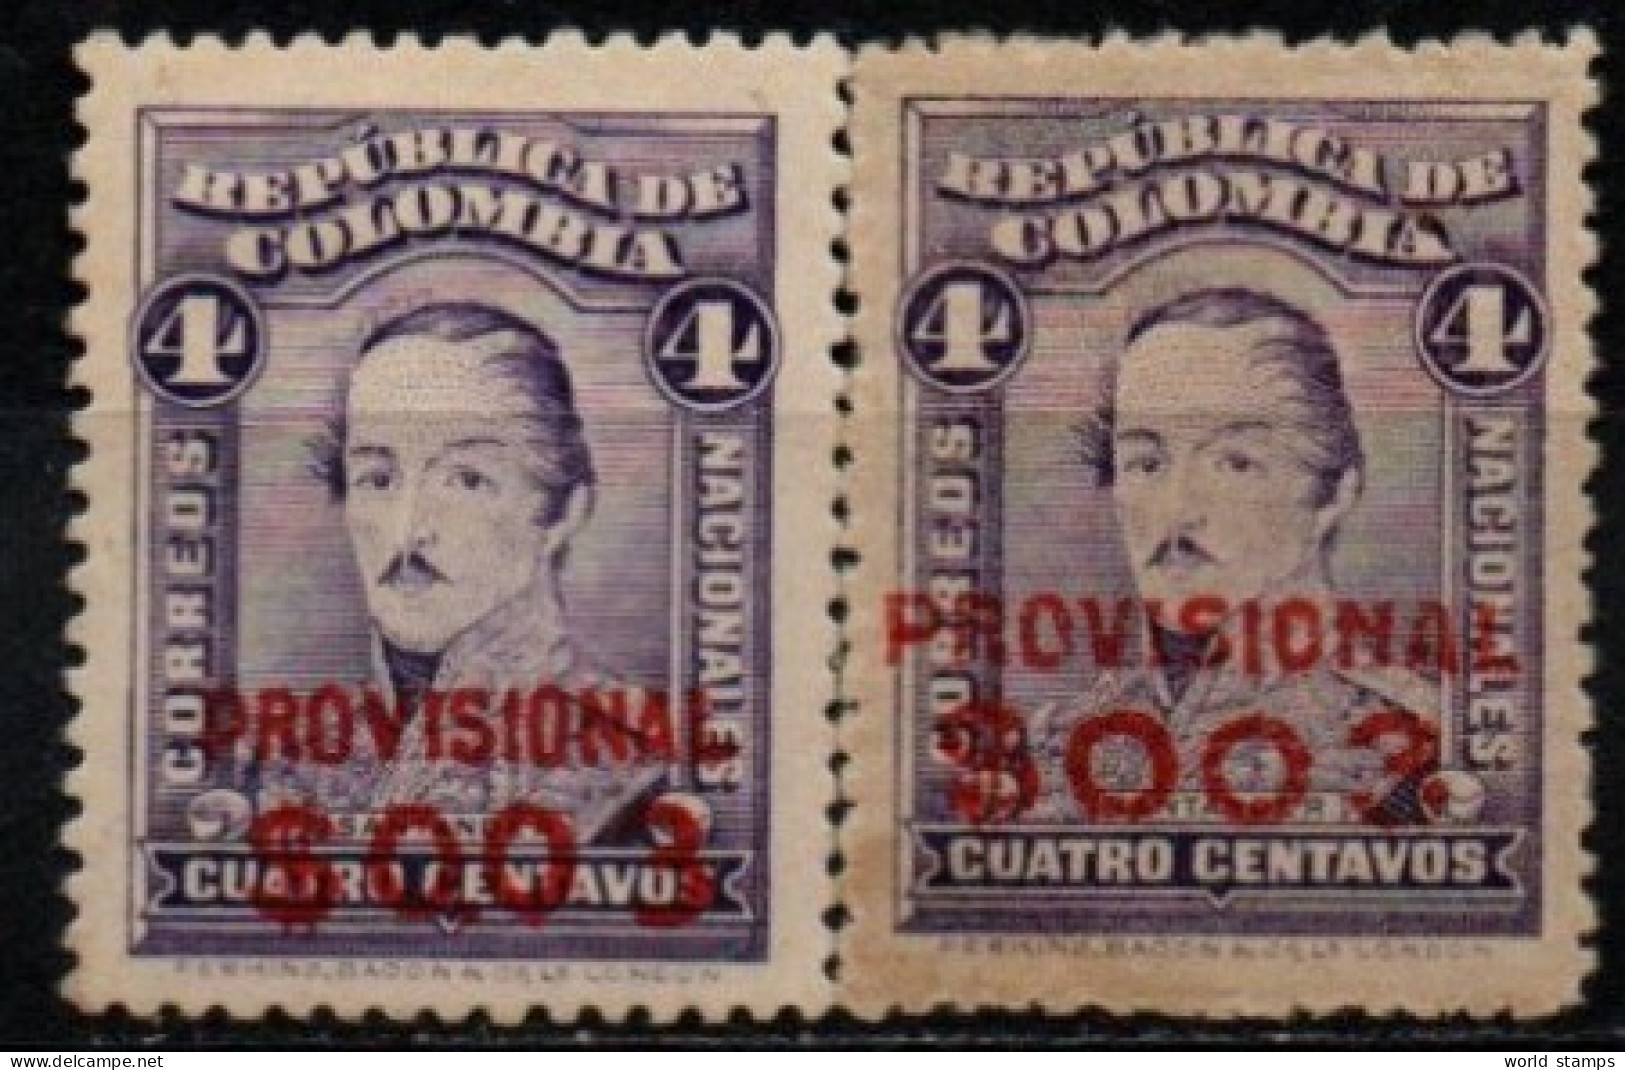 COLOMBIE 1922-4 * - Colombia